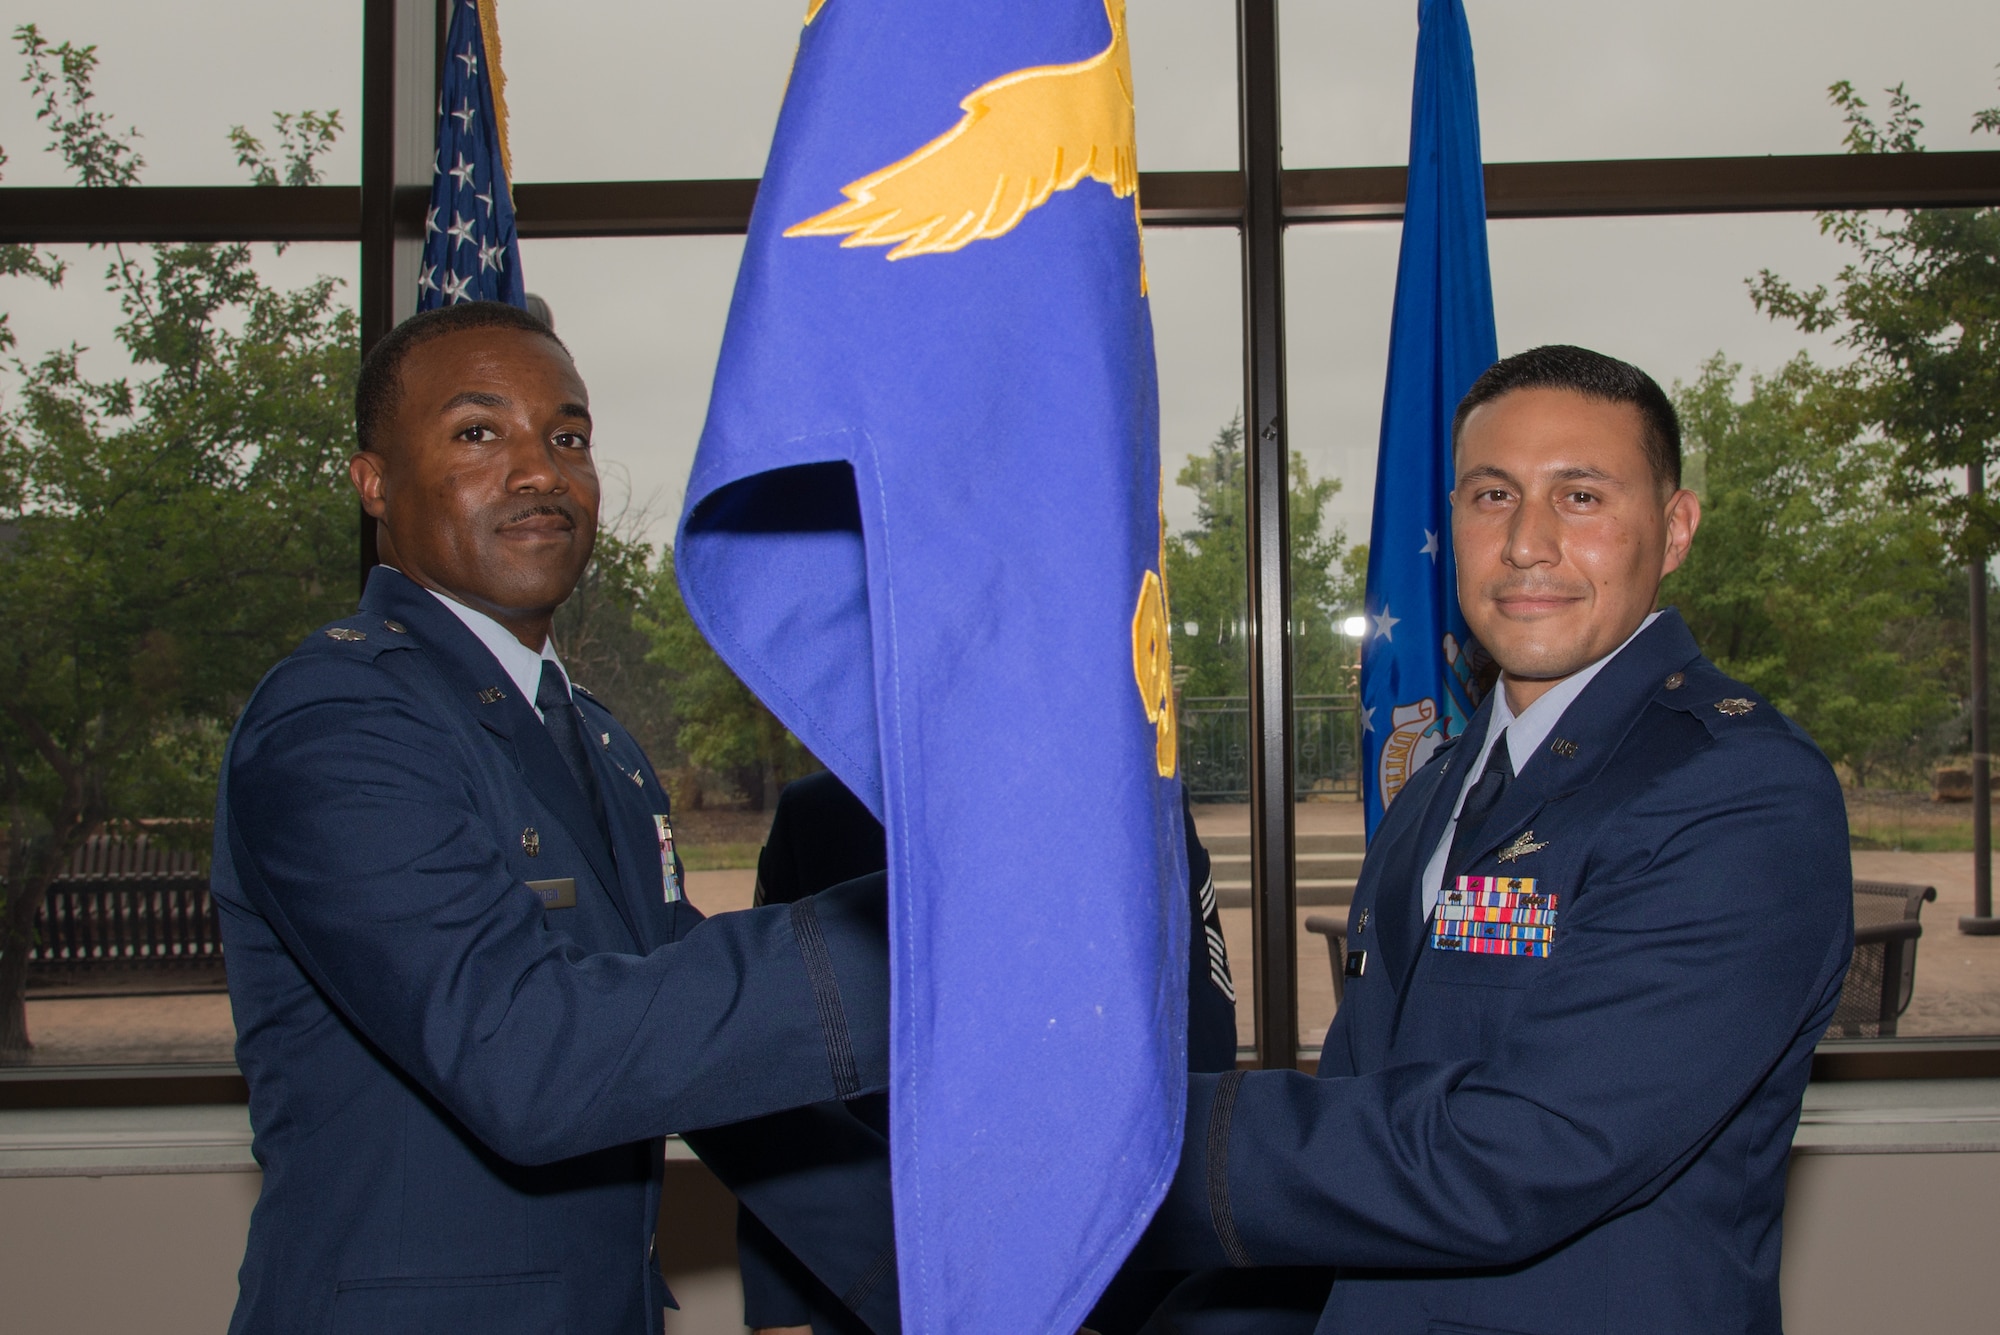 Lt. Col. Silas Darden, left, the 960th Cyberspace Operations Group Detachment 2 commander, passes the 960th NOS guidon to Lt. Col. Fernando Ruiz as he takes command of the squadron during a change of command ceremony at Peterson Air Force Base, Colorado, Sept. 8, 2018.